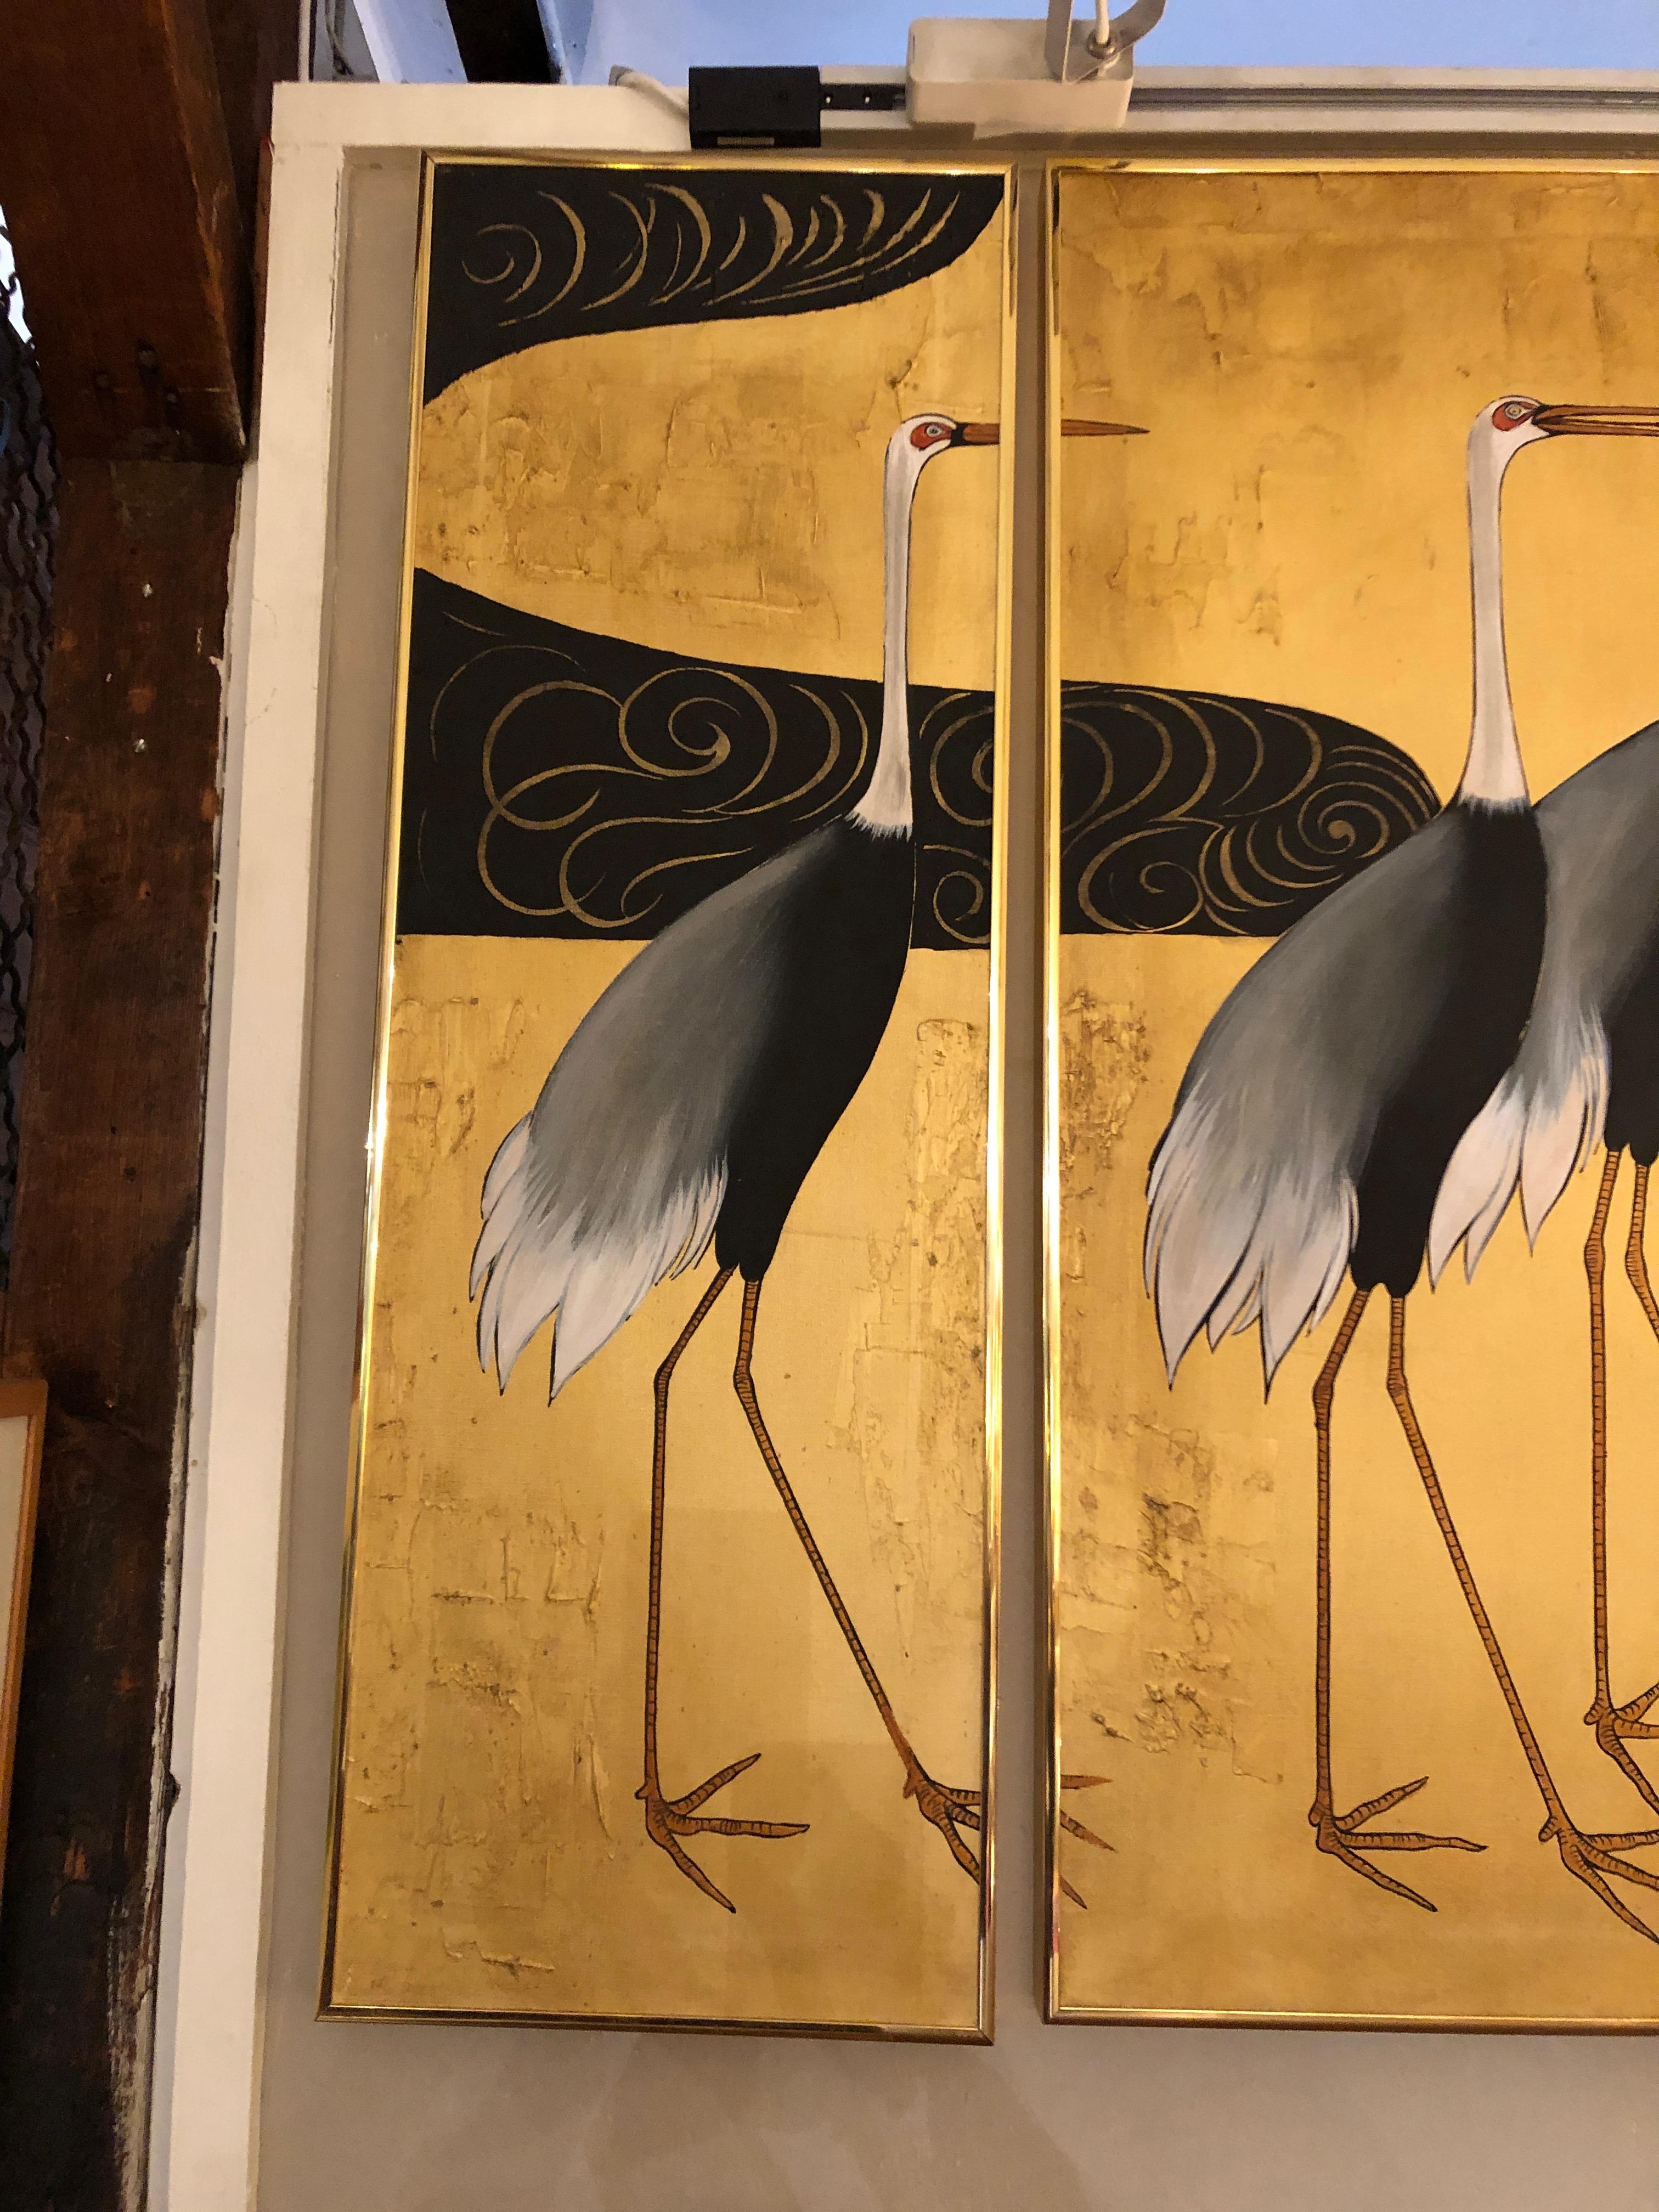 Very beautiful Asian painting of a flock of herons, black and white against a gilded background with Asian lettering lower right and an abstract shape, perhaps water, at upper left. The art is created on 3 canvases that create an elegant triptych,